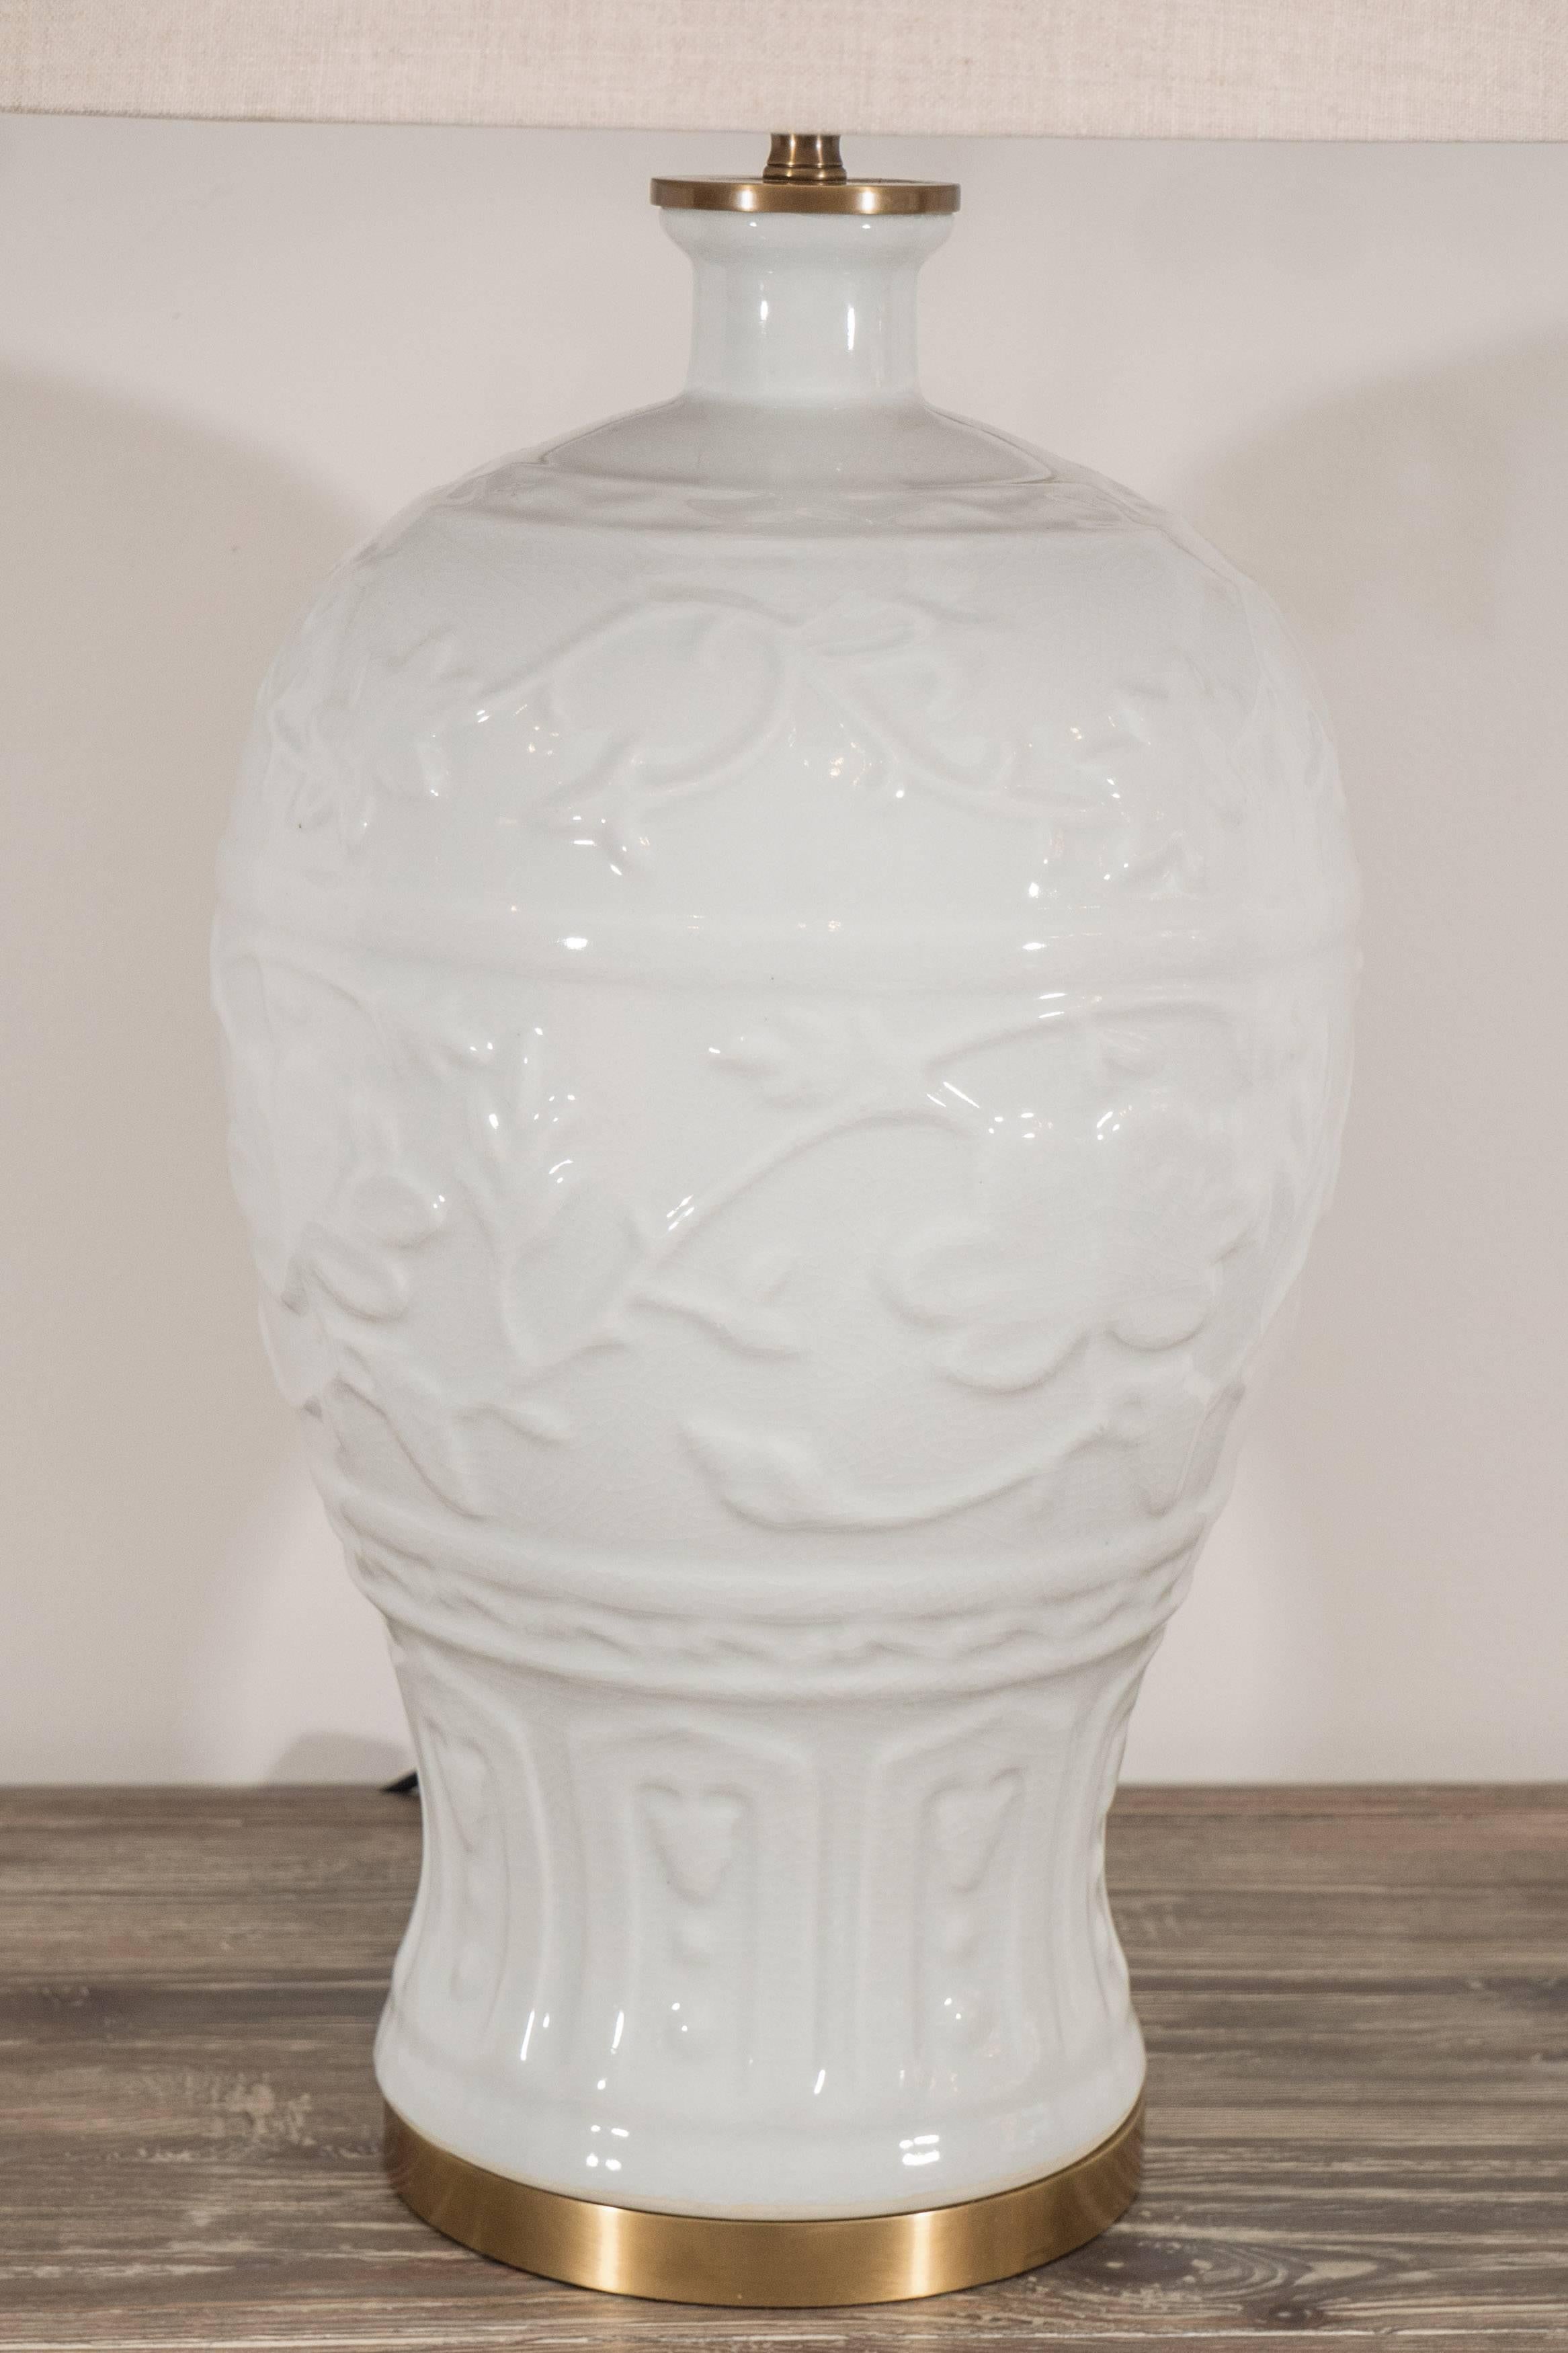 This pair of white ceramic lamps have a lovely crackled finish with a charming floral and left design. The lamps are on a brass base and include natural linen drum shades.